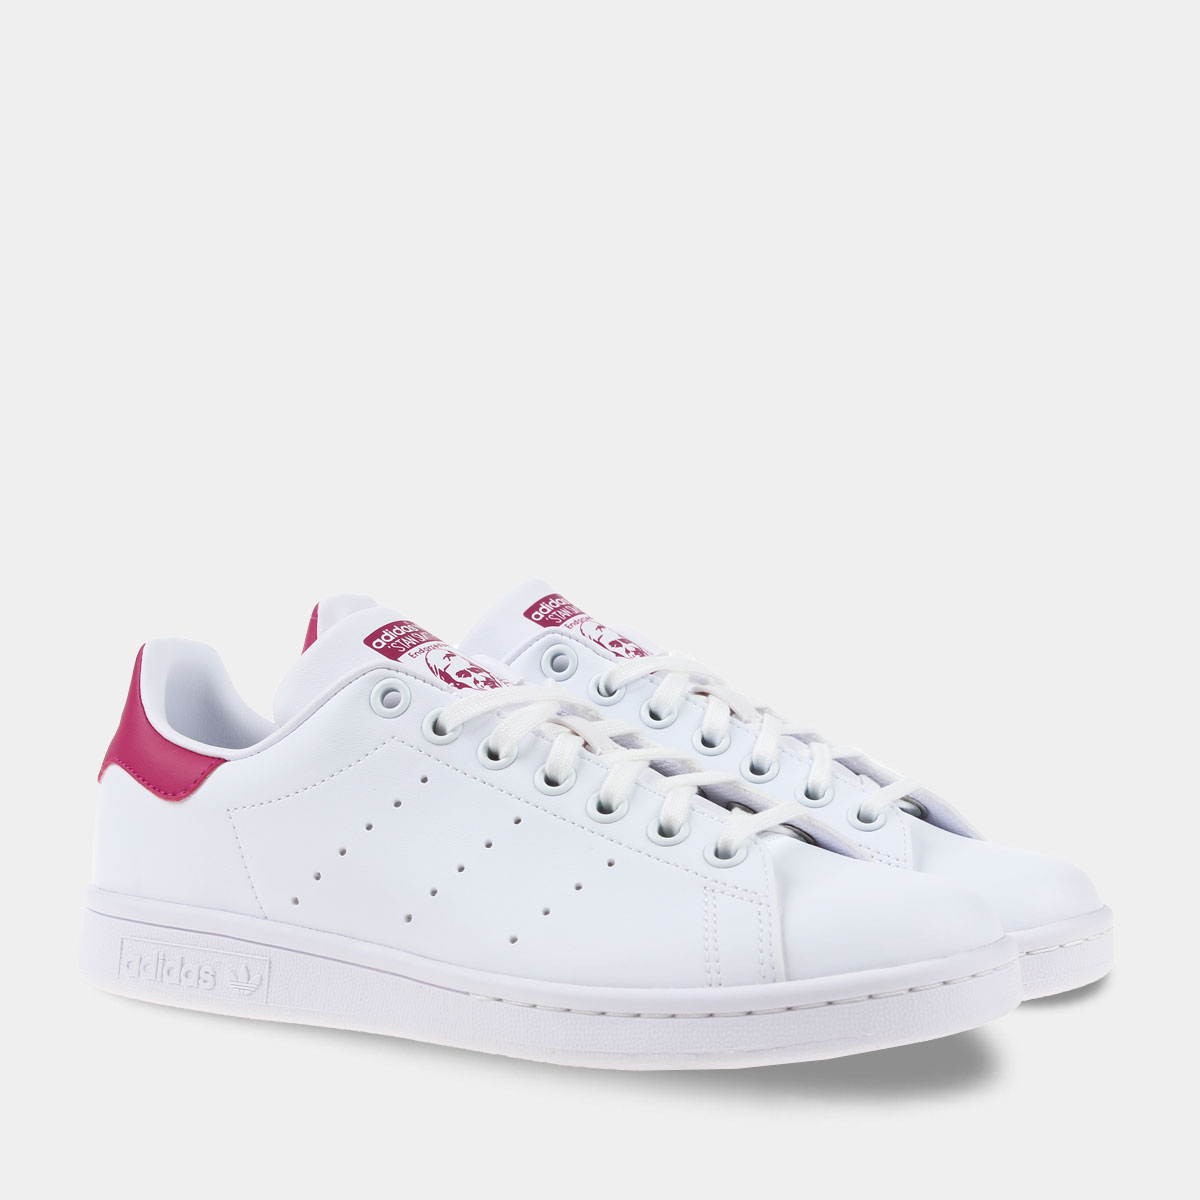 adidas Smith Wit/ Roze FX7522 SNEAKERS